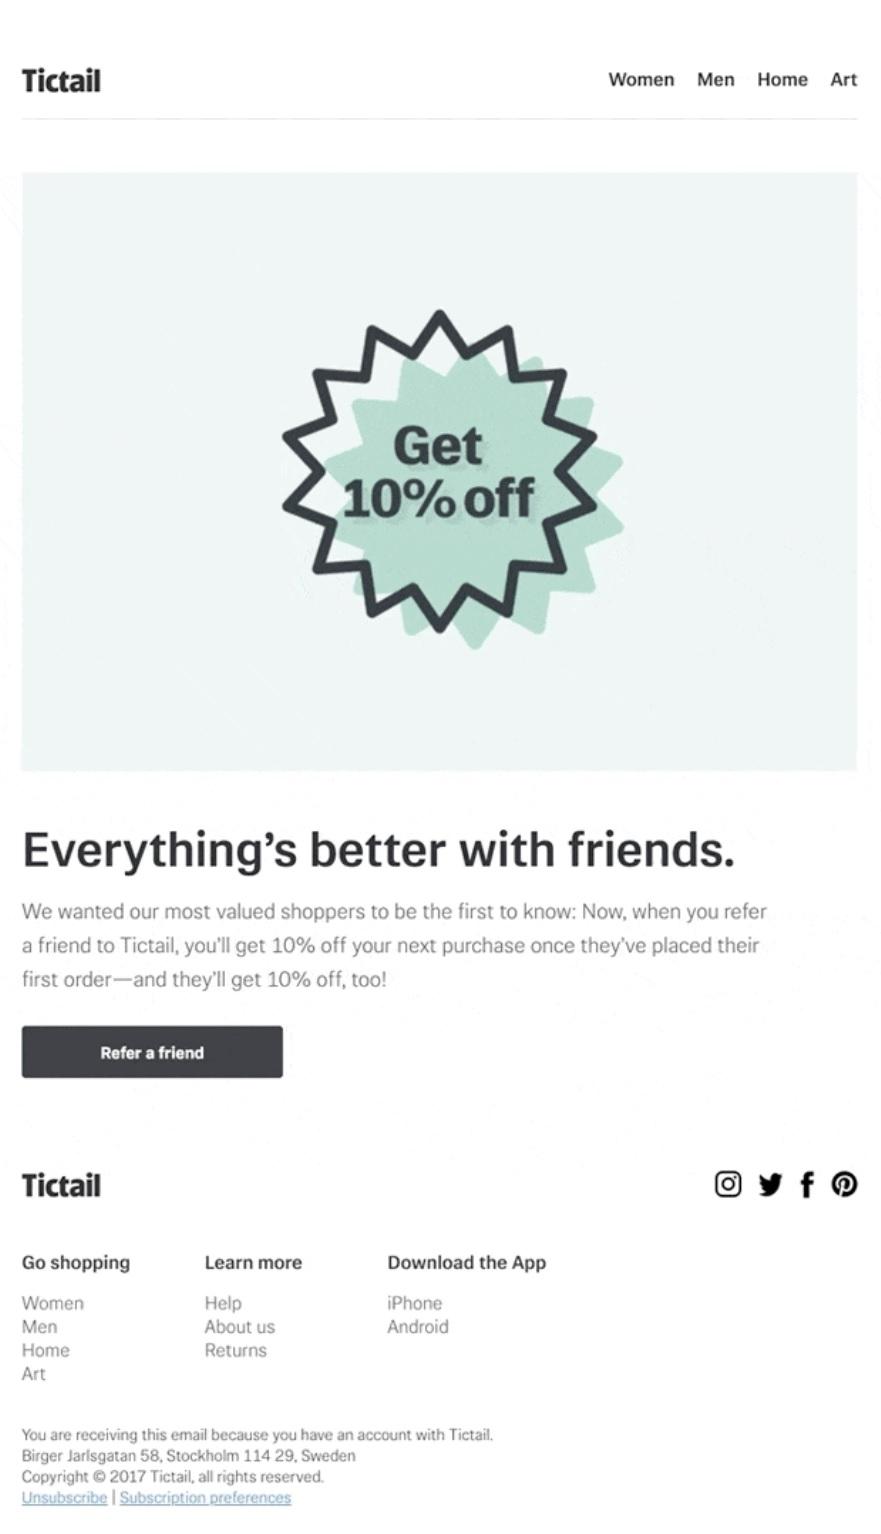 when a consumer gets an exclusive email from a favorite brand to help spread awareness, they’re more likely to forward it to a friend, especially if it has an enticing incentive attached.